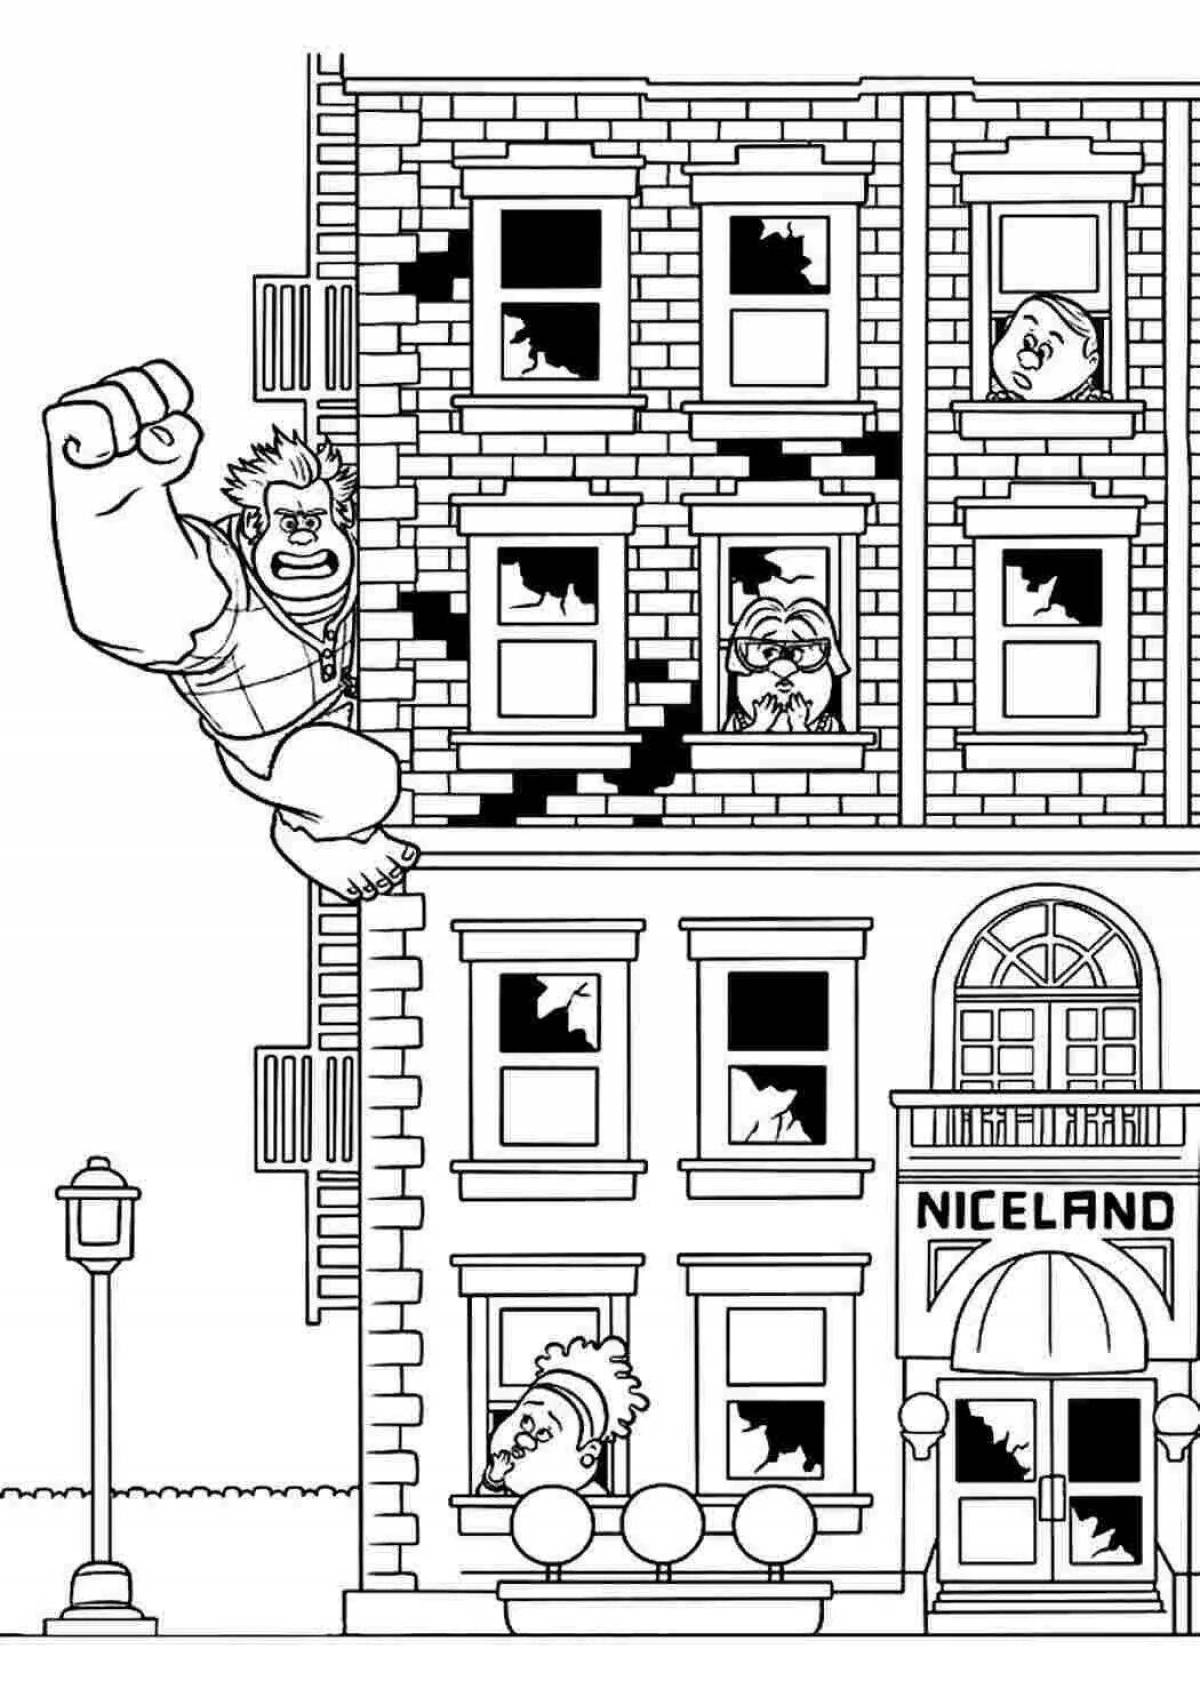 Cubert's playful coloring page